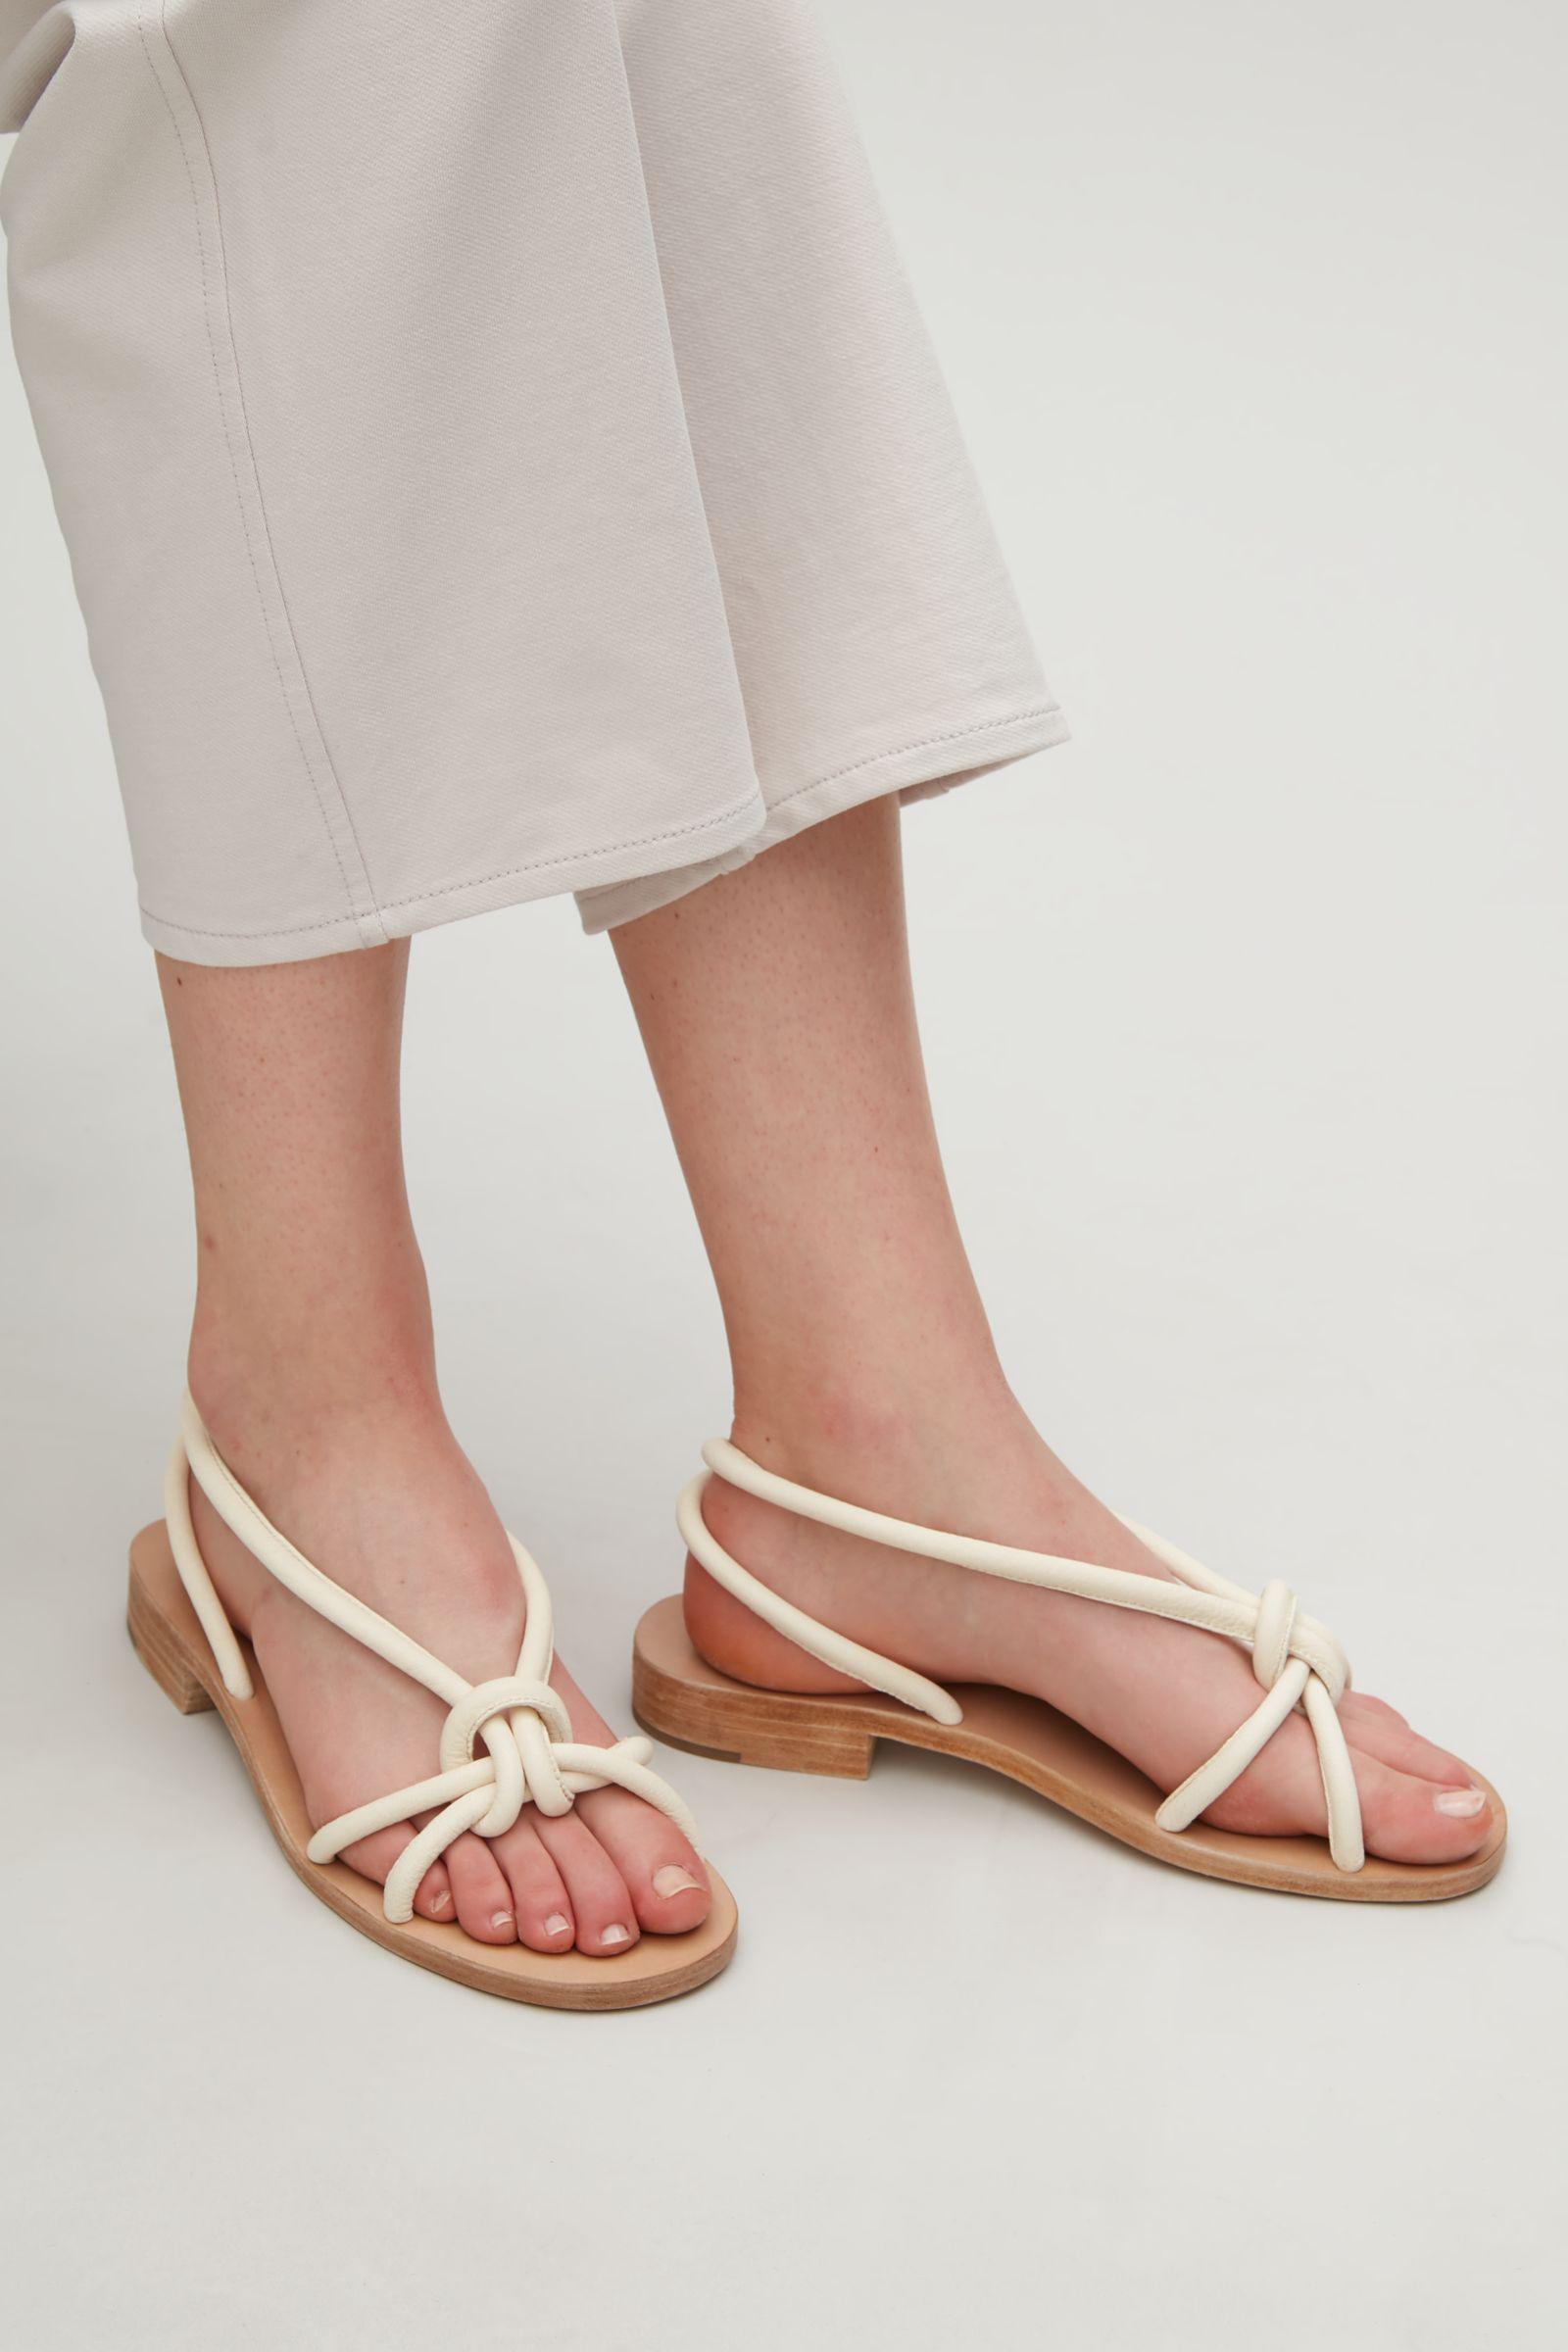 COS Leather Knotted Strap Sandals in 